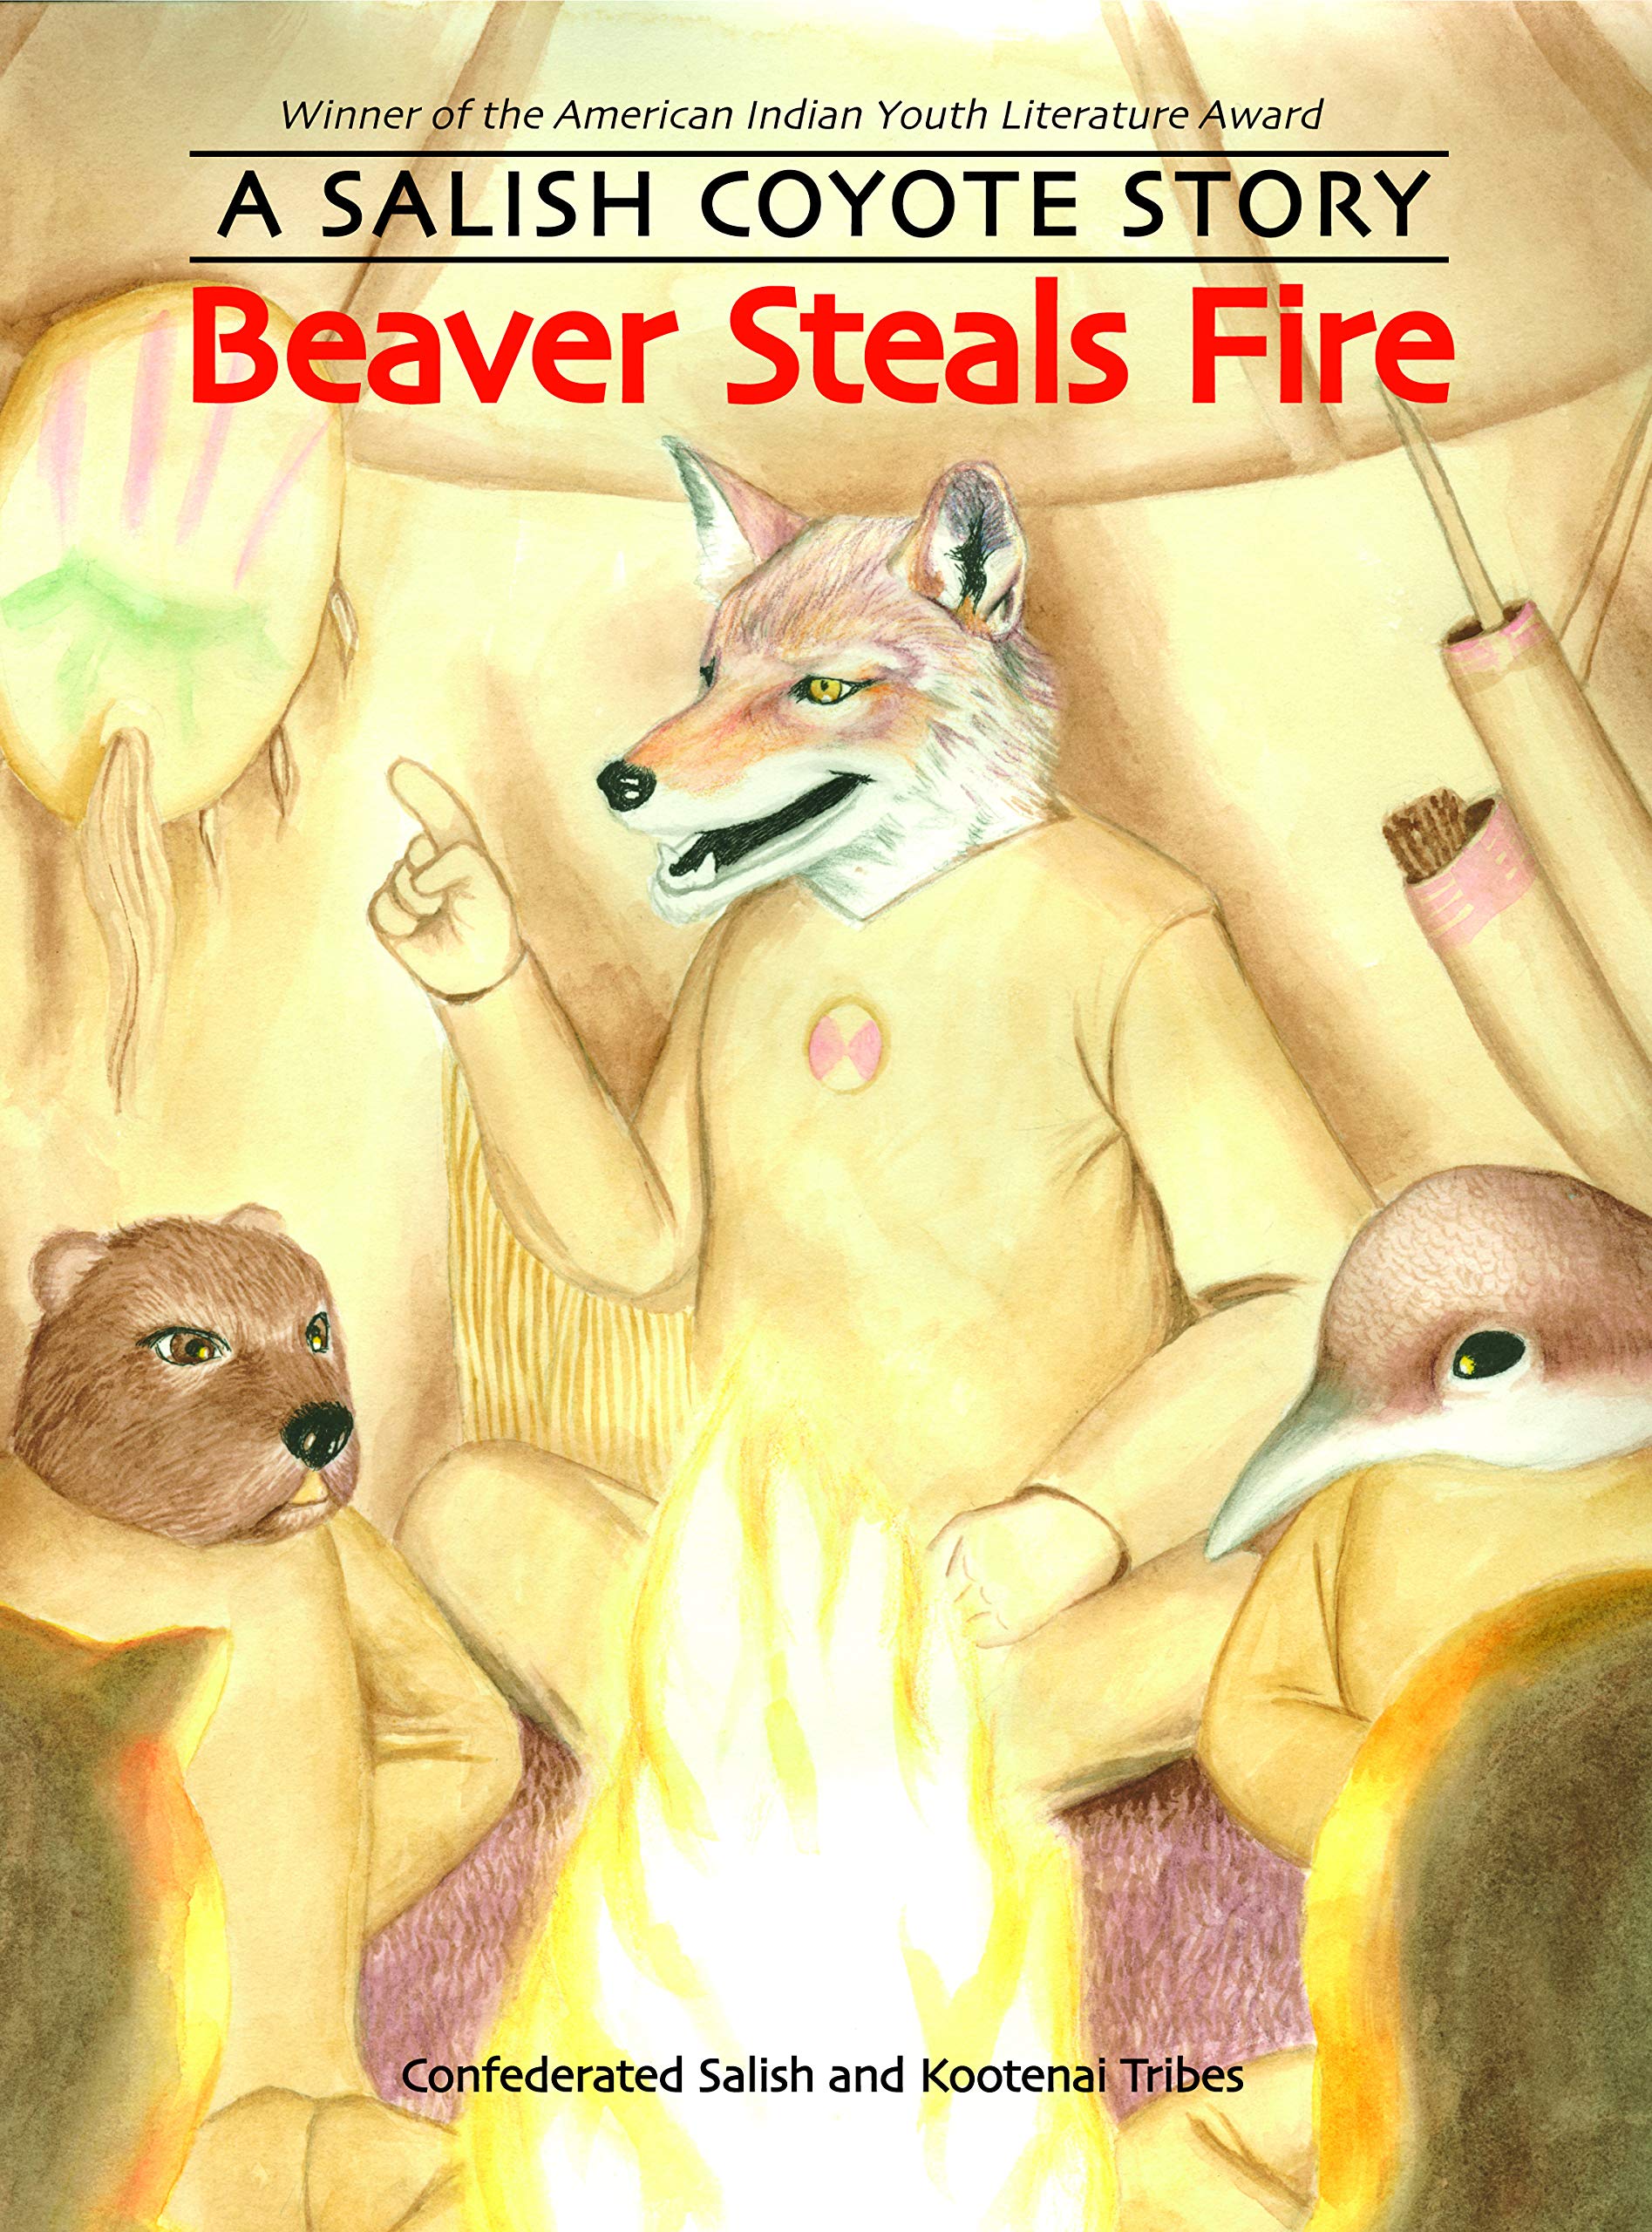 Beaver steals fire: A Salish Coyote story (book cover)